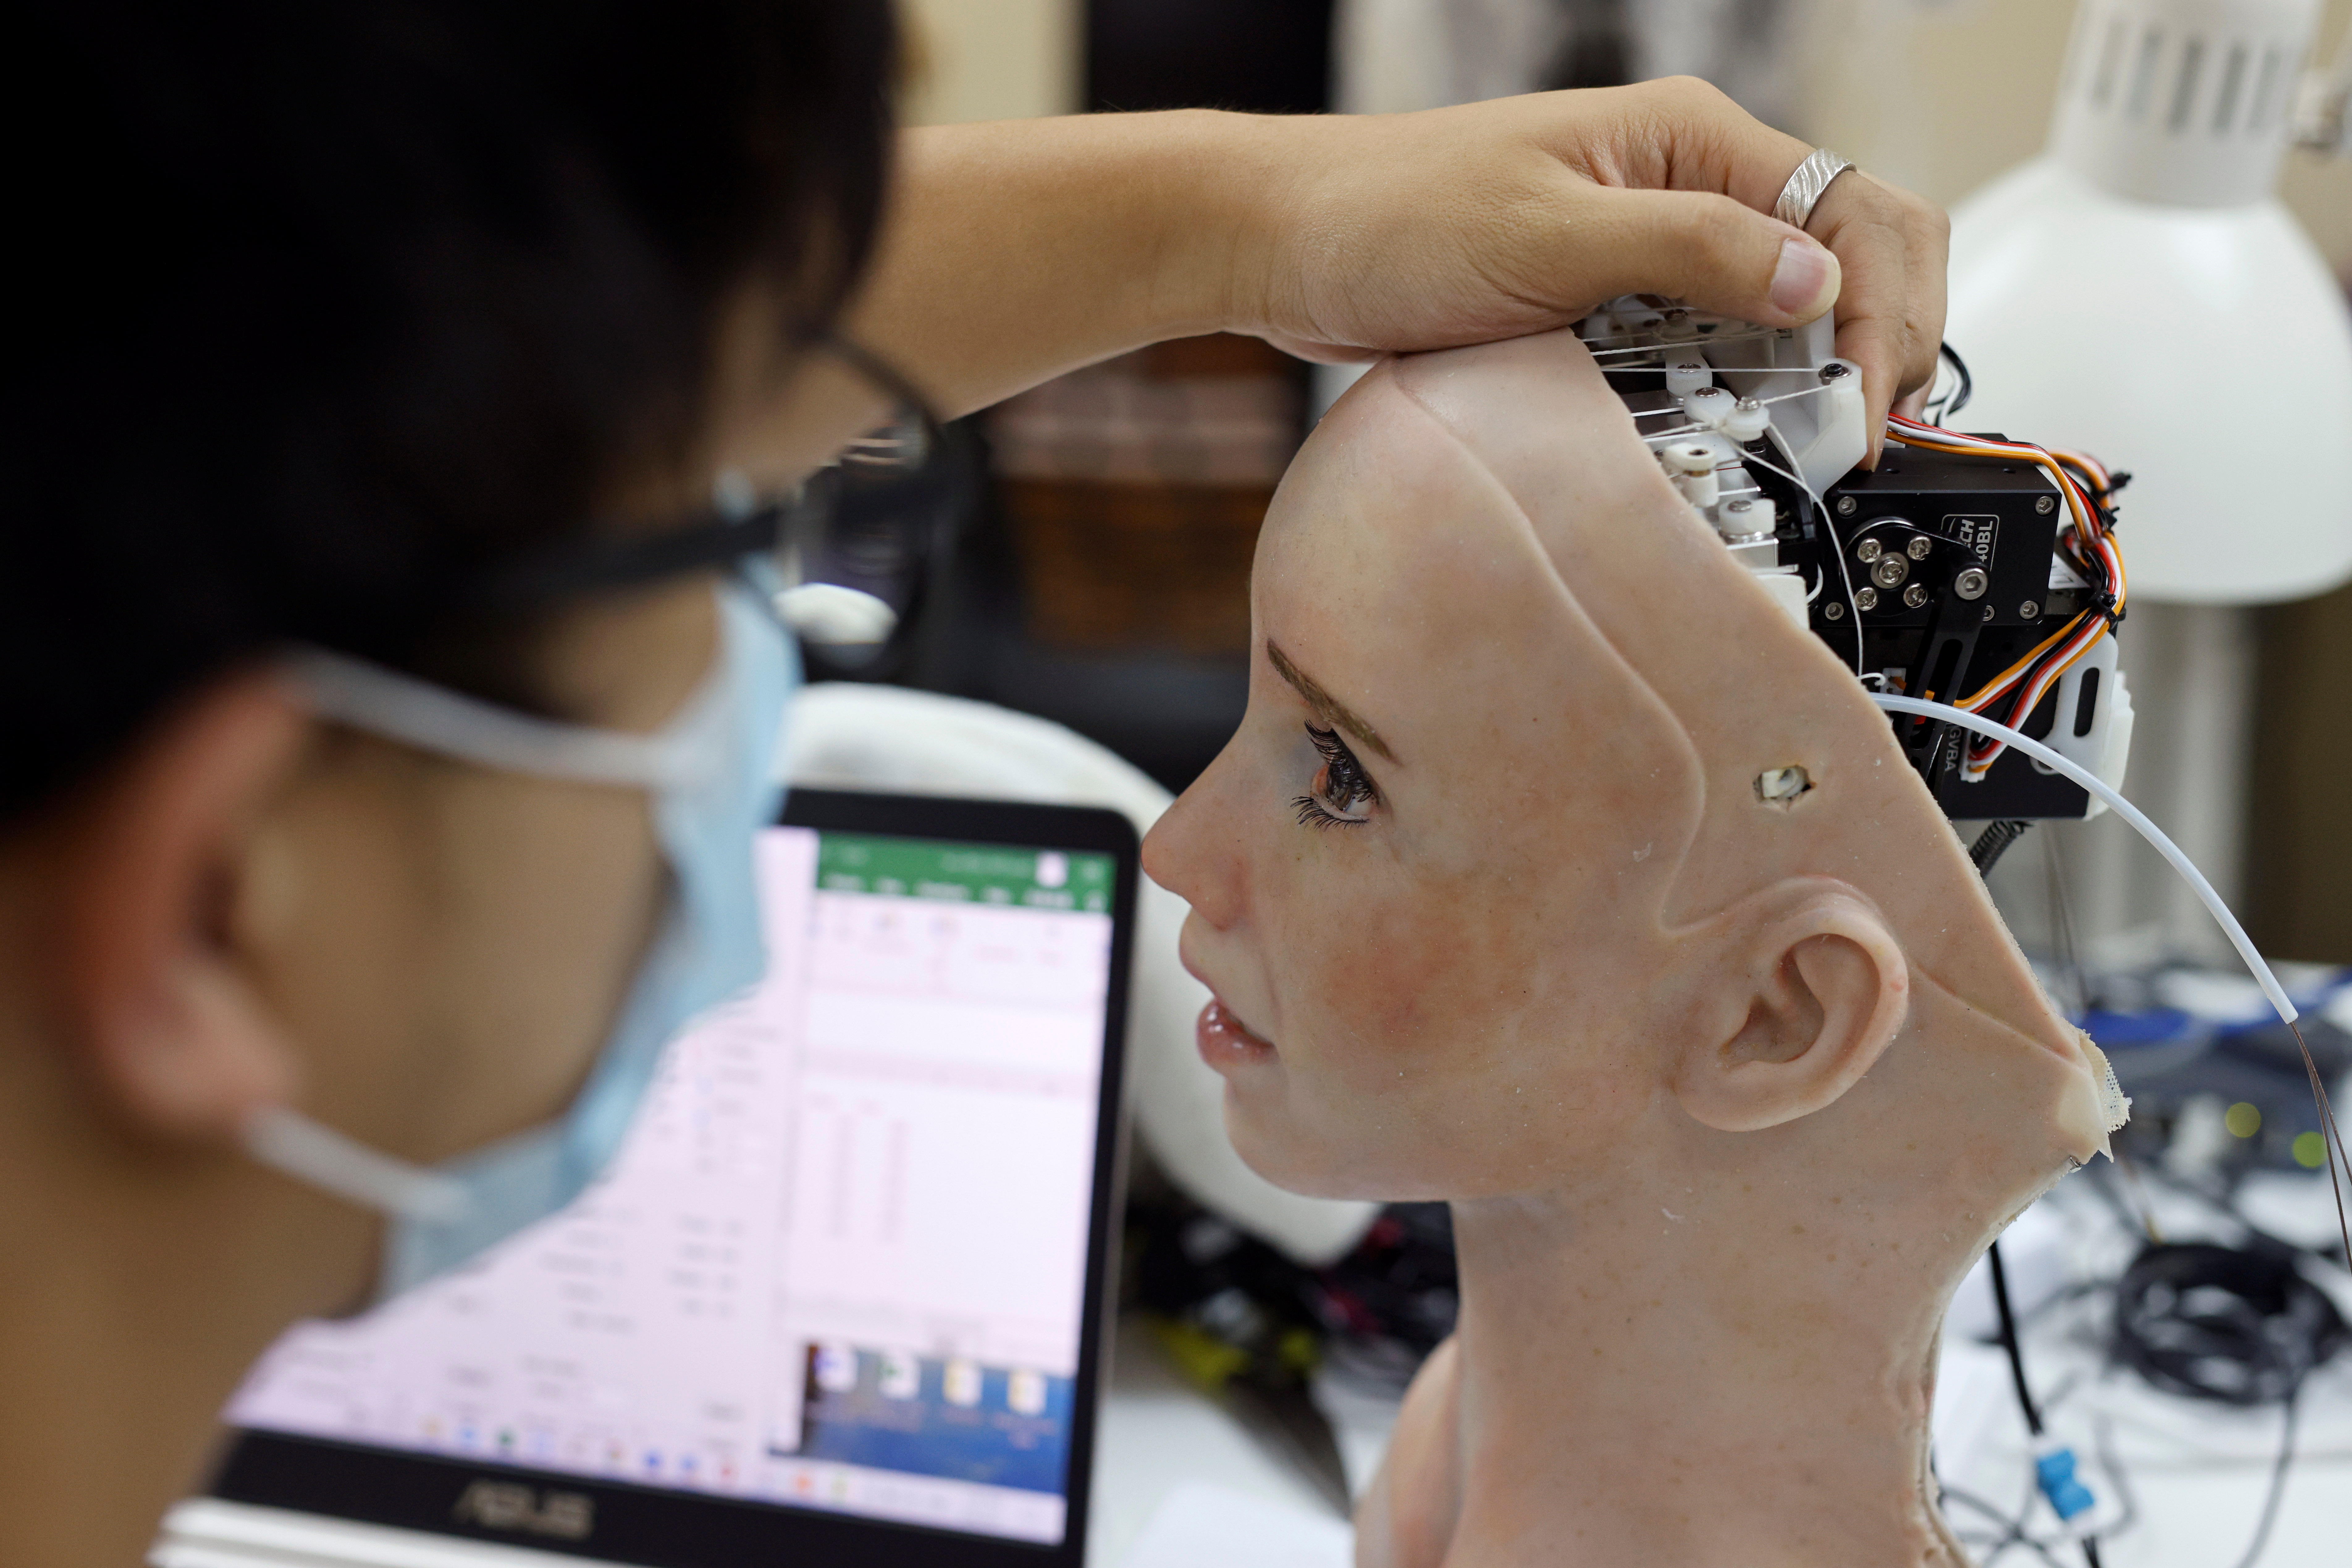 An engineer adjusts the head of humanoid robot Grace, developed by Hanson Robotics and designed for the healthcare market, to interact and comfort the elderly and isolated people, especially those suffering during the coronavirus disease (COVID-19) pandemic, at the company's lab in Hong Kong, China May 4, 2021. Picture taken May 4, 2021. REUTERS/Tyrone Siu